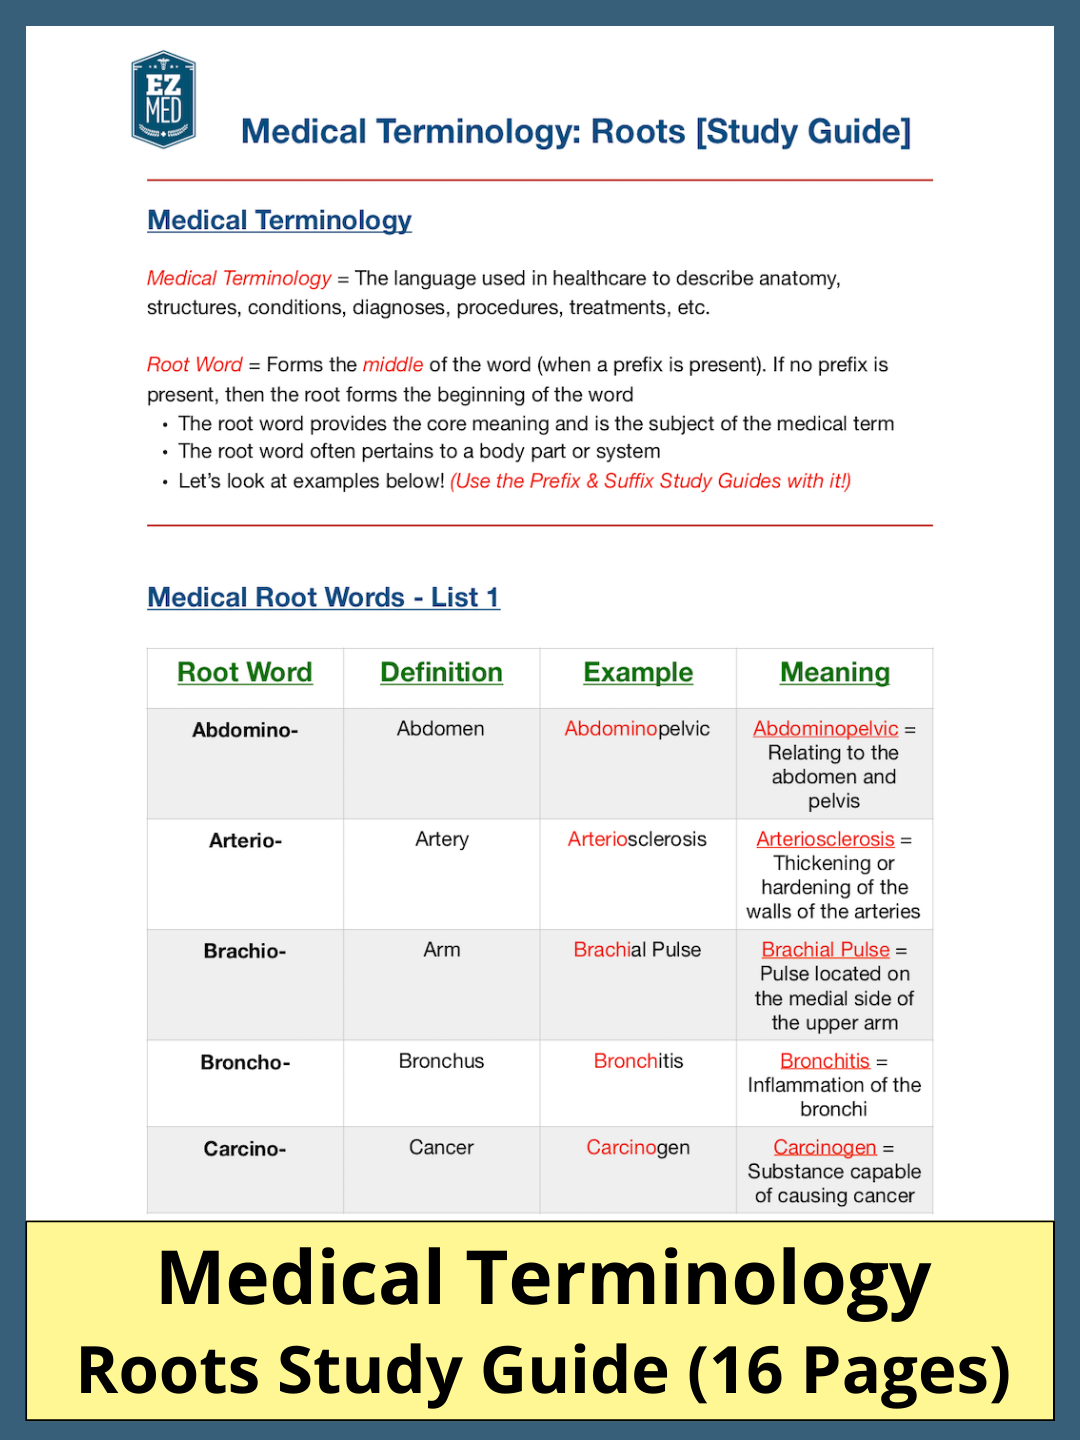 Root Words: Medical Terminology [Study Guide]